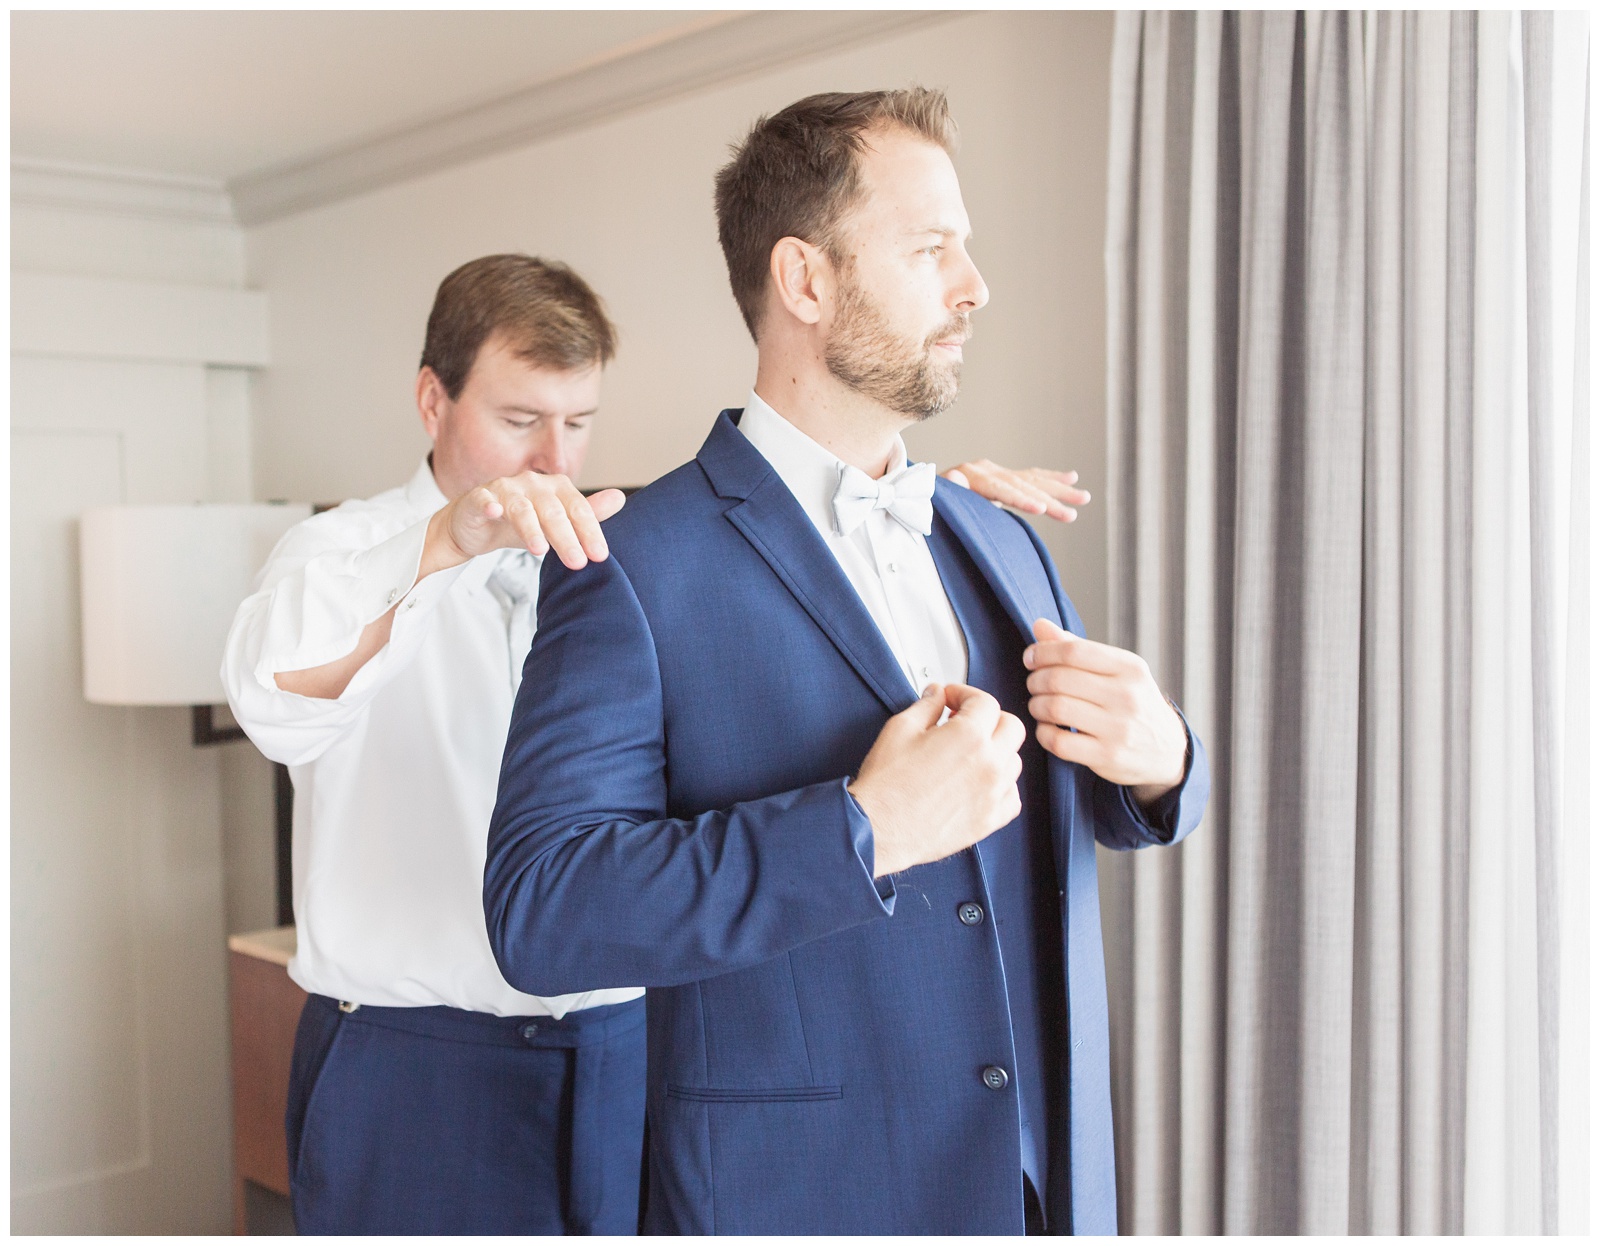 Best man helping groom get ready | Matlock and Kelly Photography